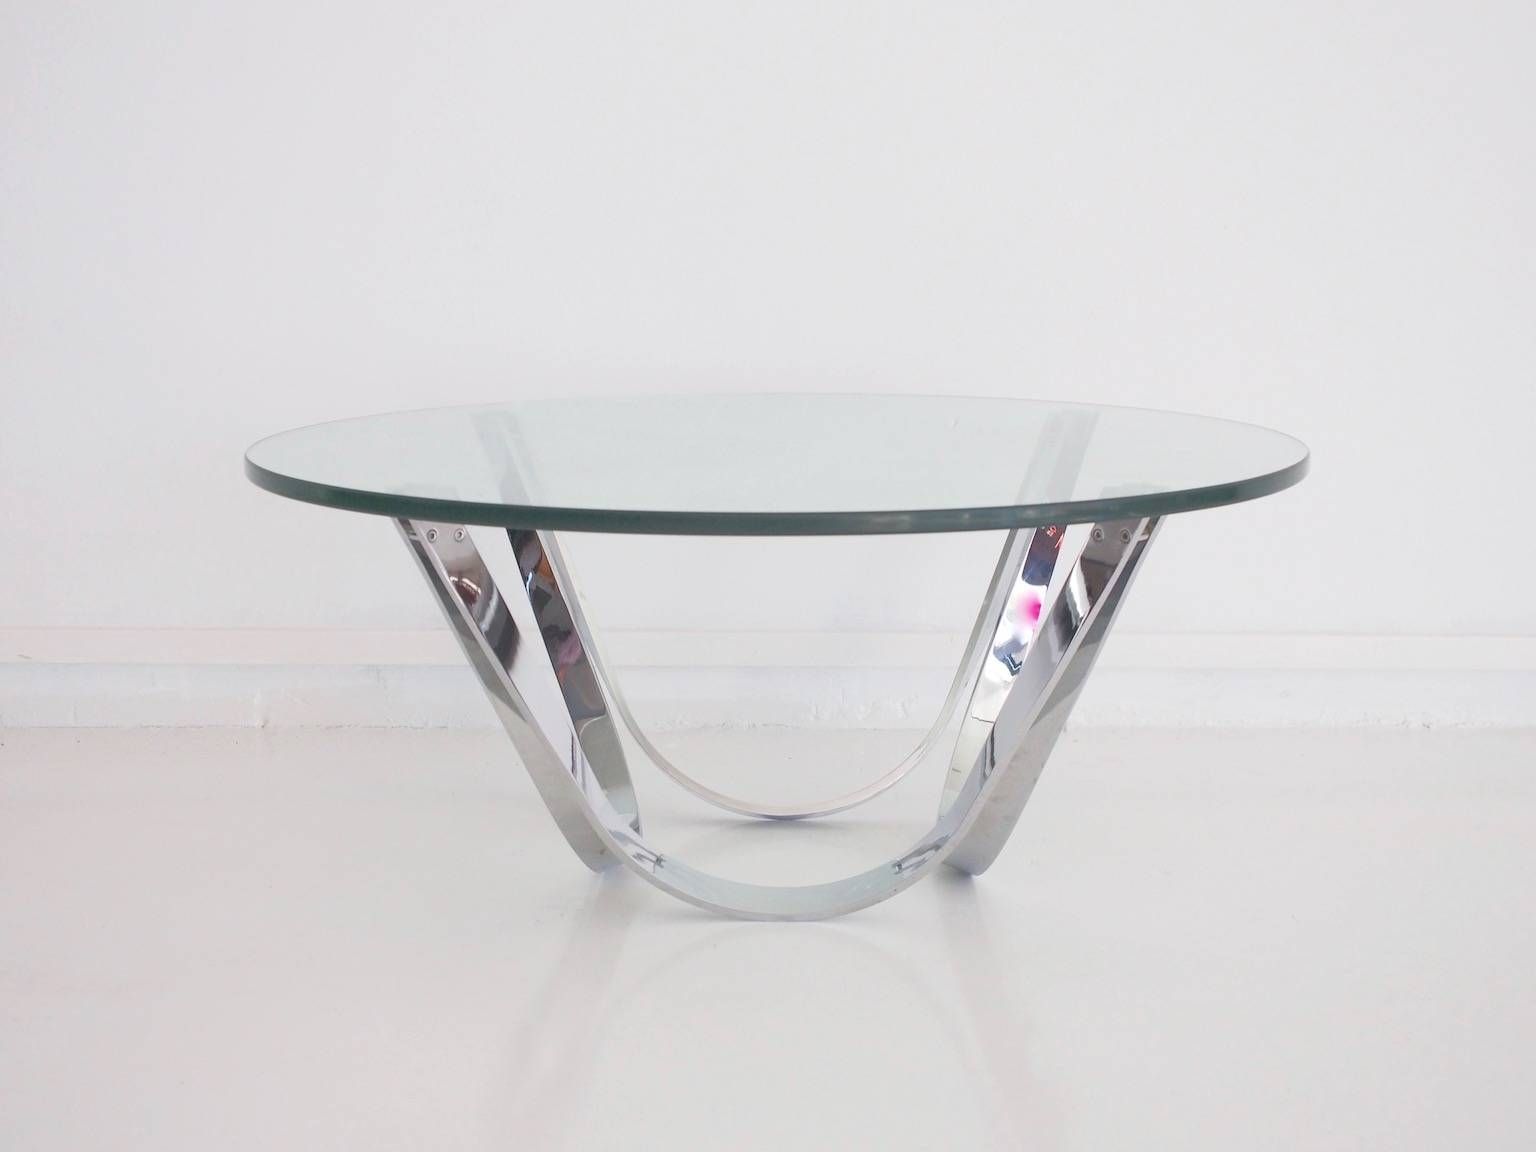 Vintage Chrome And Glass Coffee Tableroger Sprunger For Dunbar Within Chrome Glass Coffee Tables (View 7 of 30)